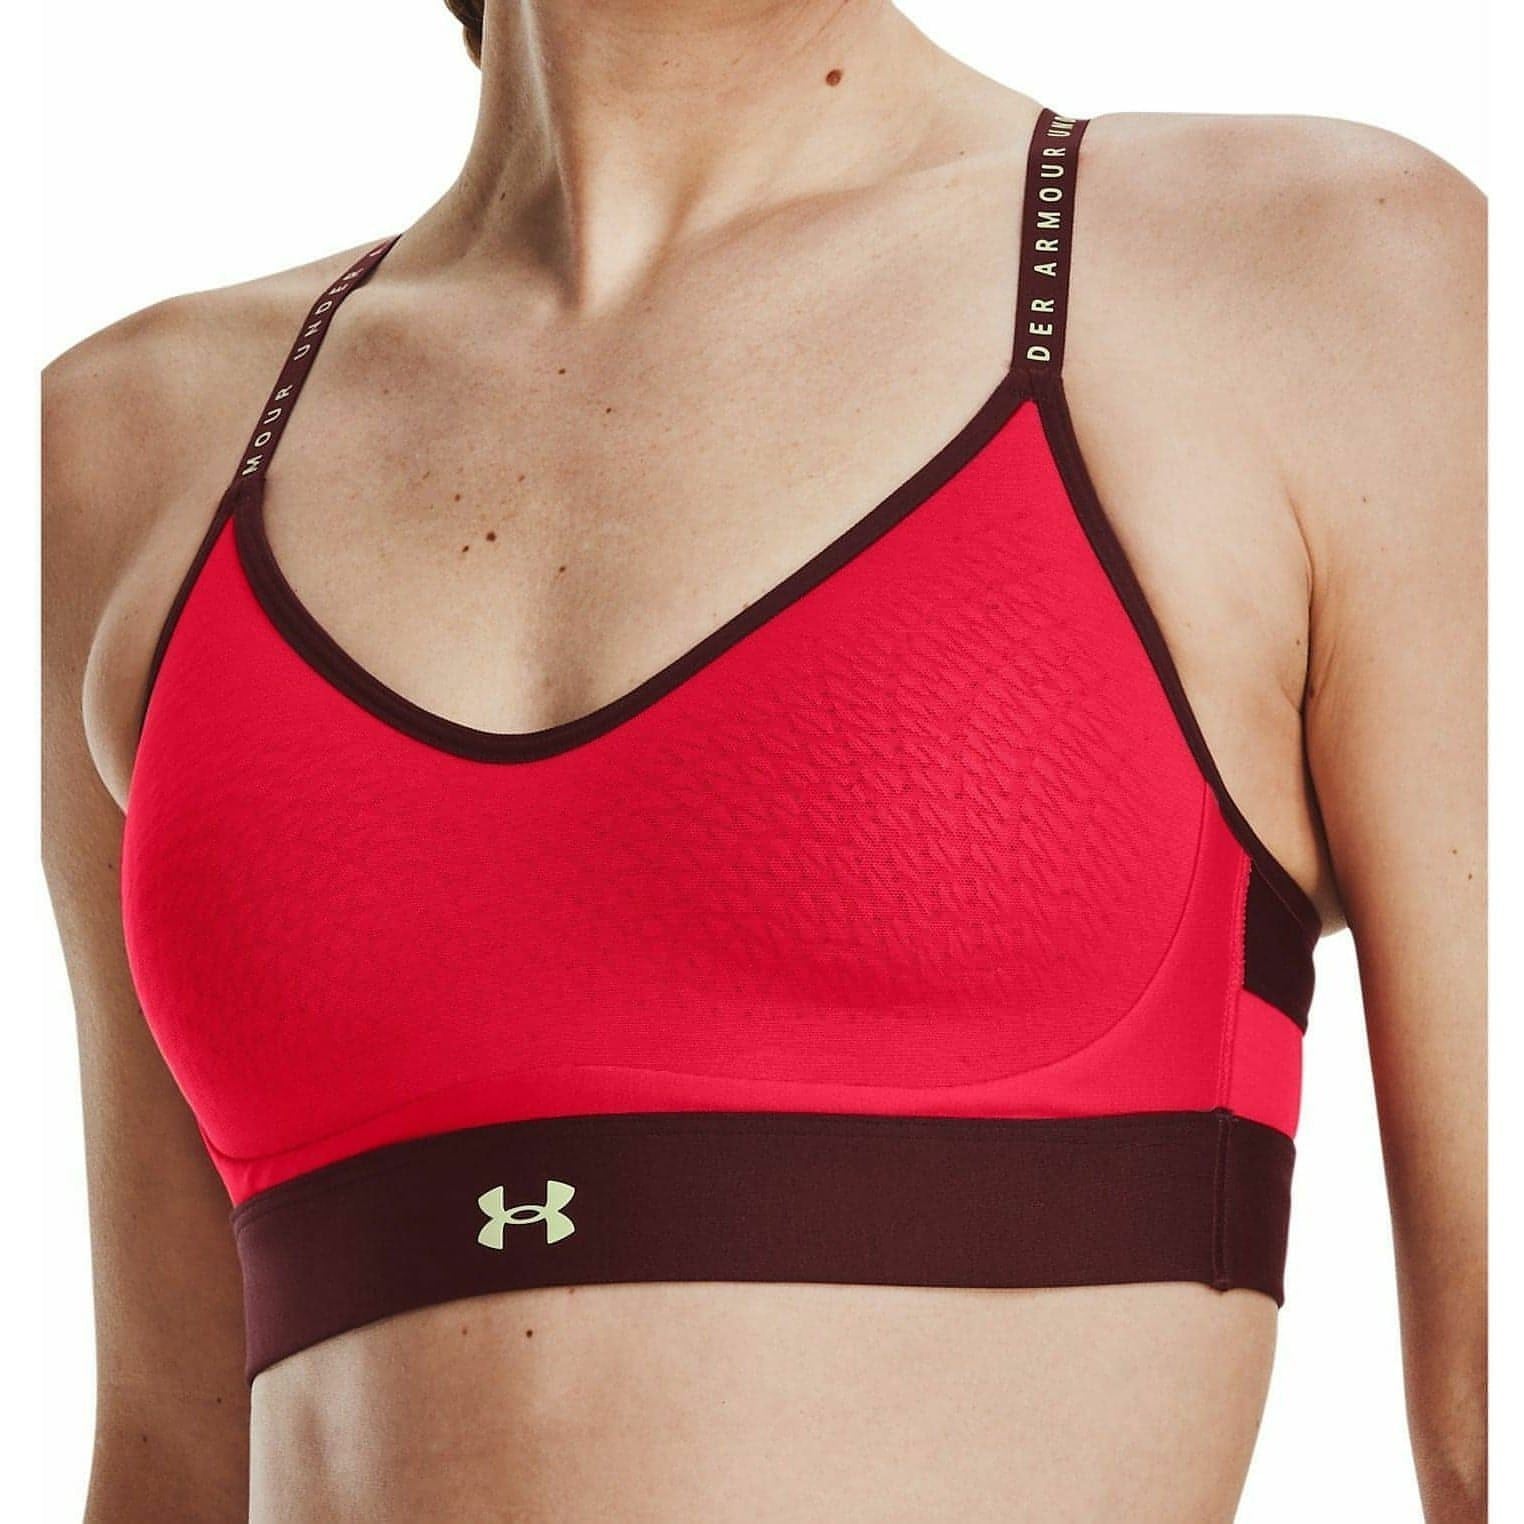 Under Armour infinity Low Womens Sports Bra - Red - Start Fitness